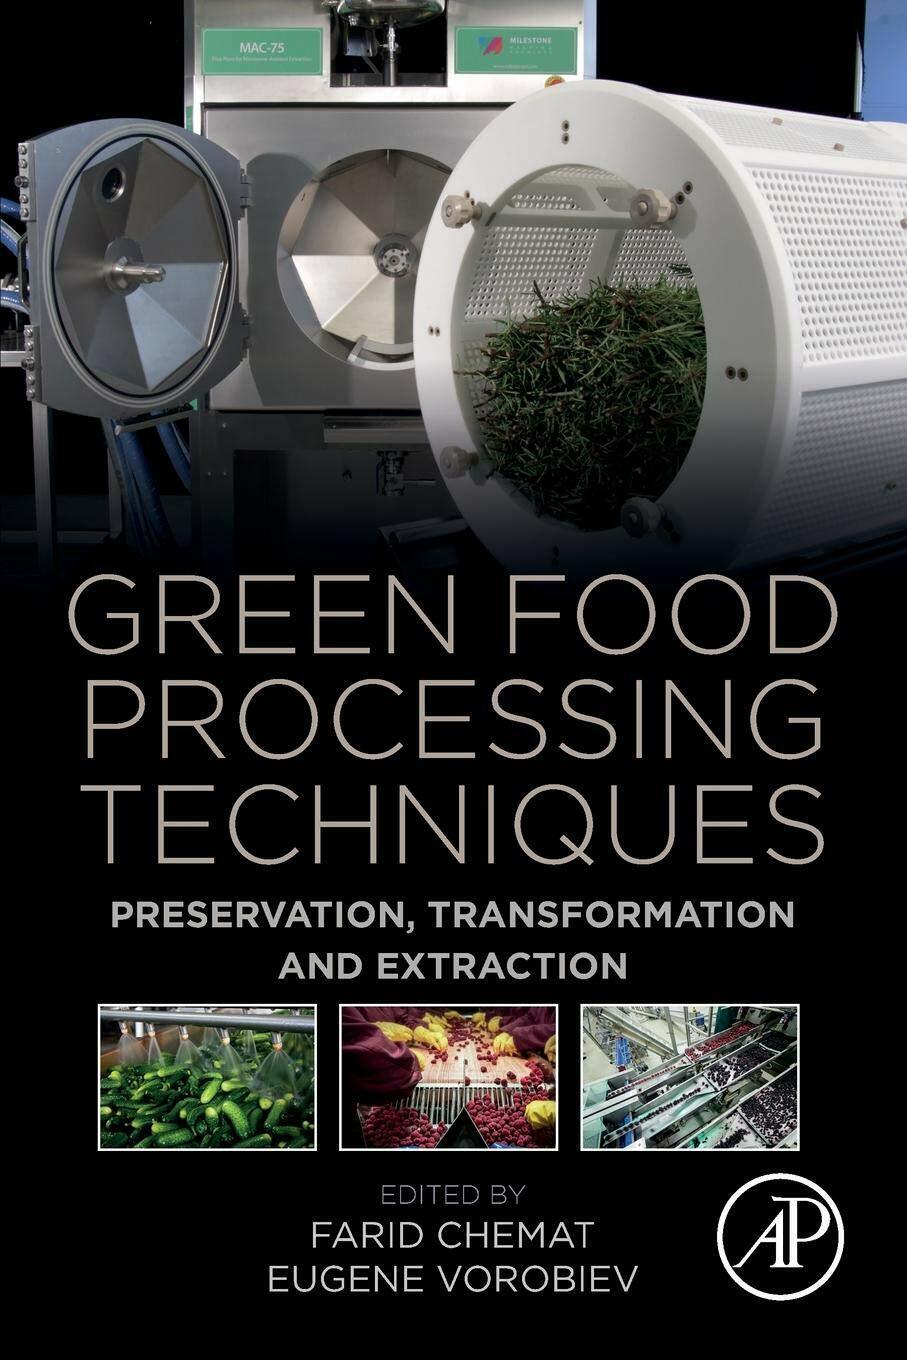 Green Food Processing Techniques - Farid Chemat  - Elsevier, 2019